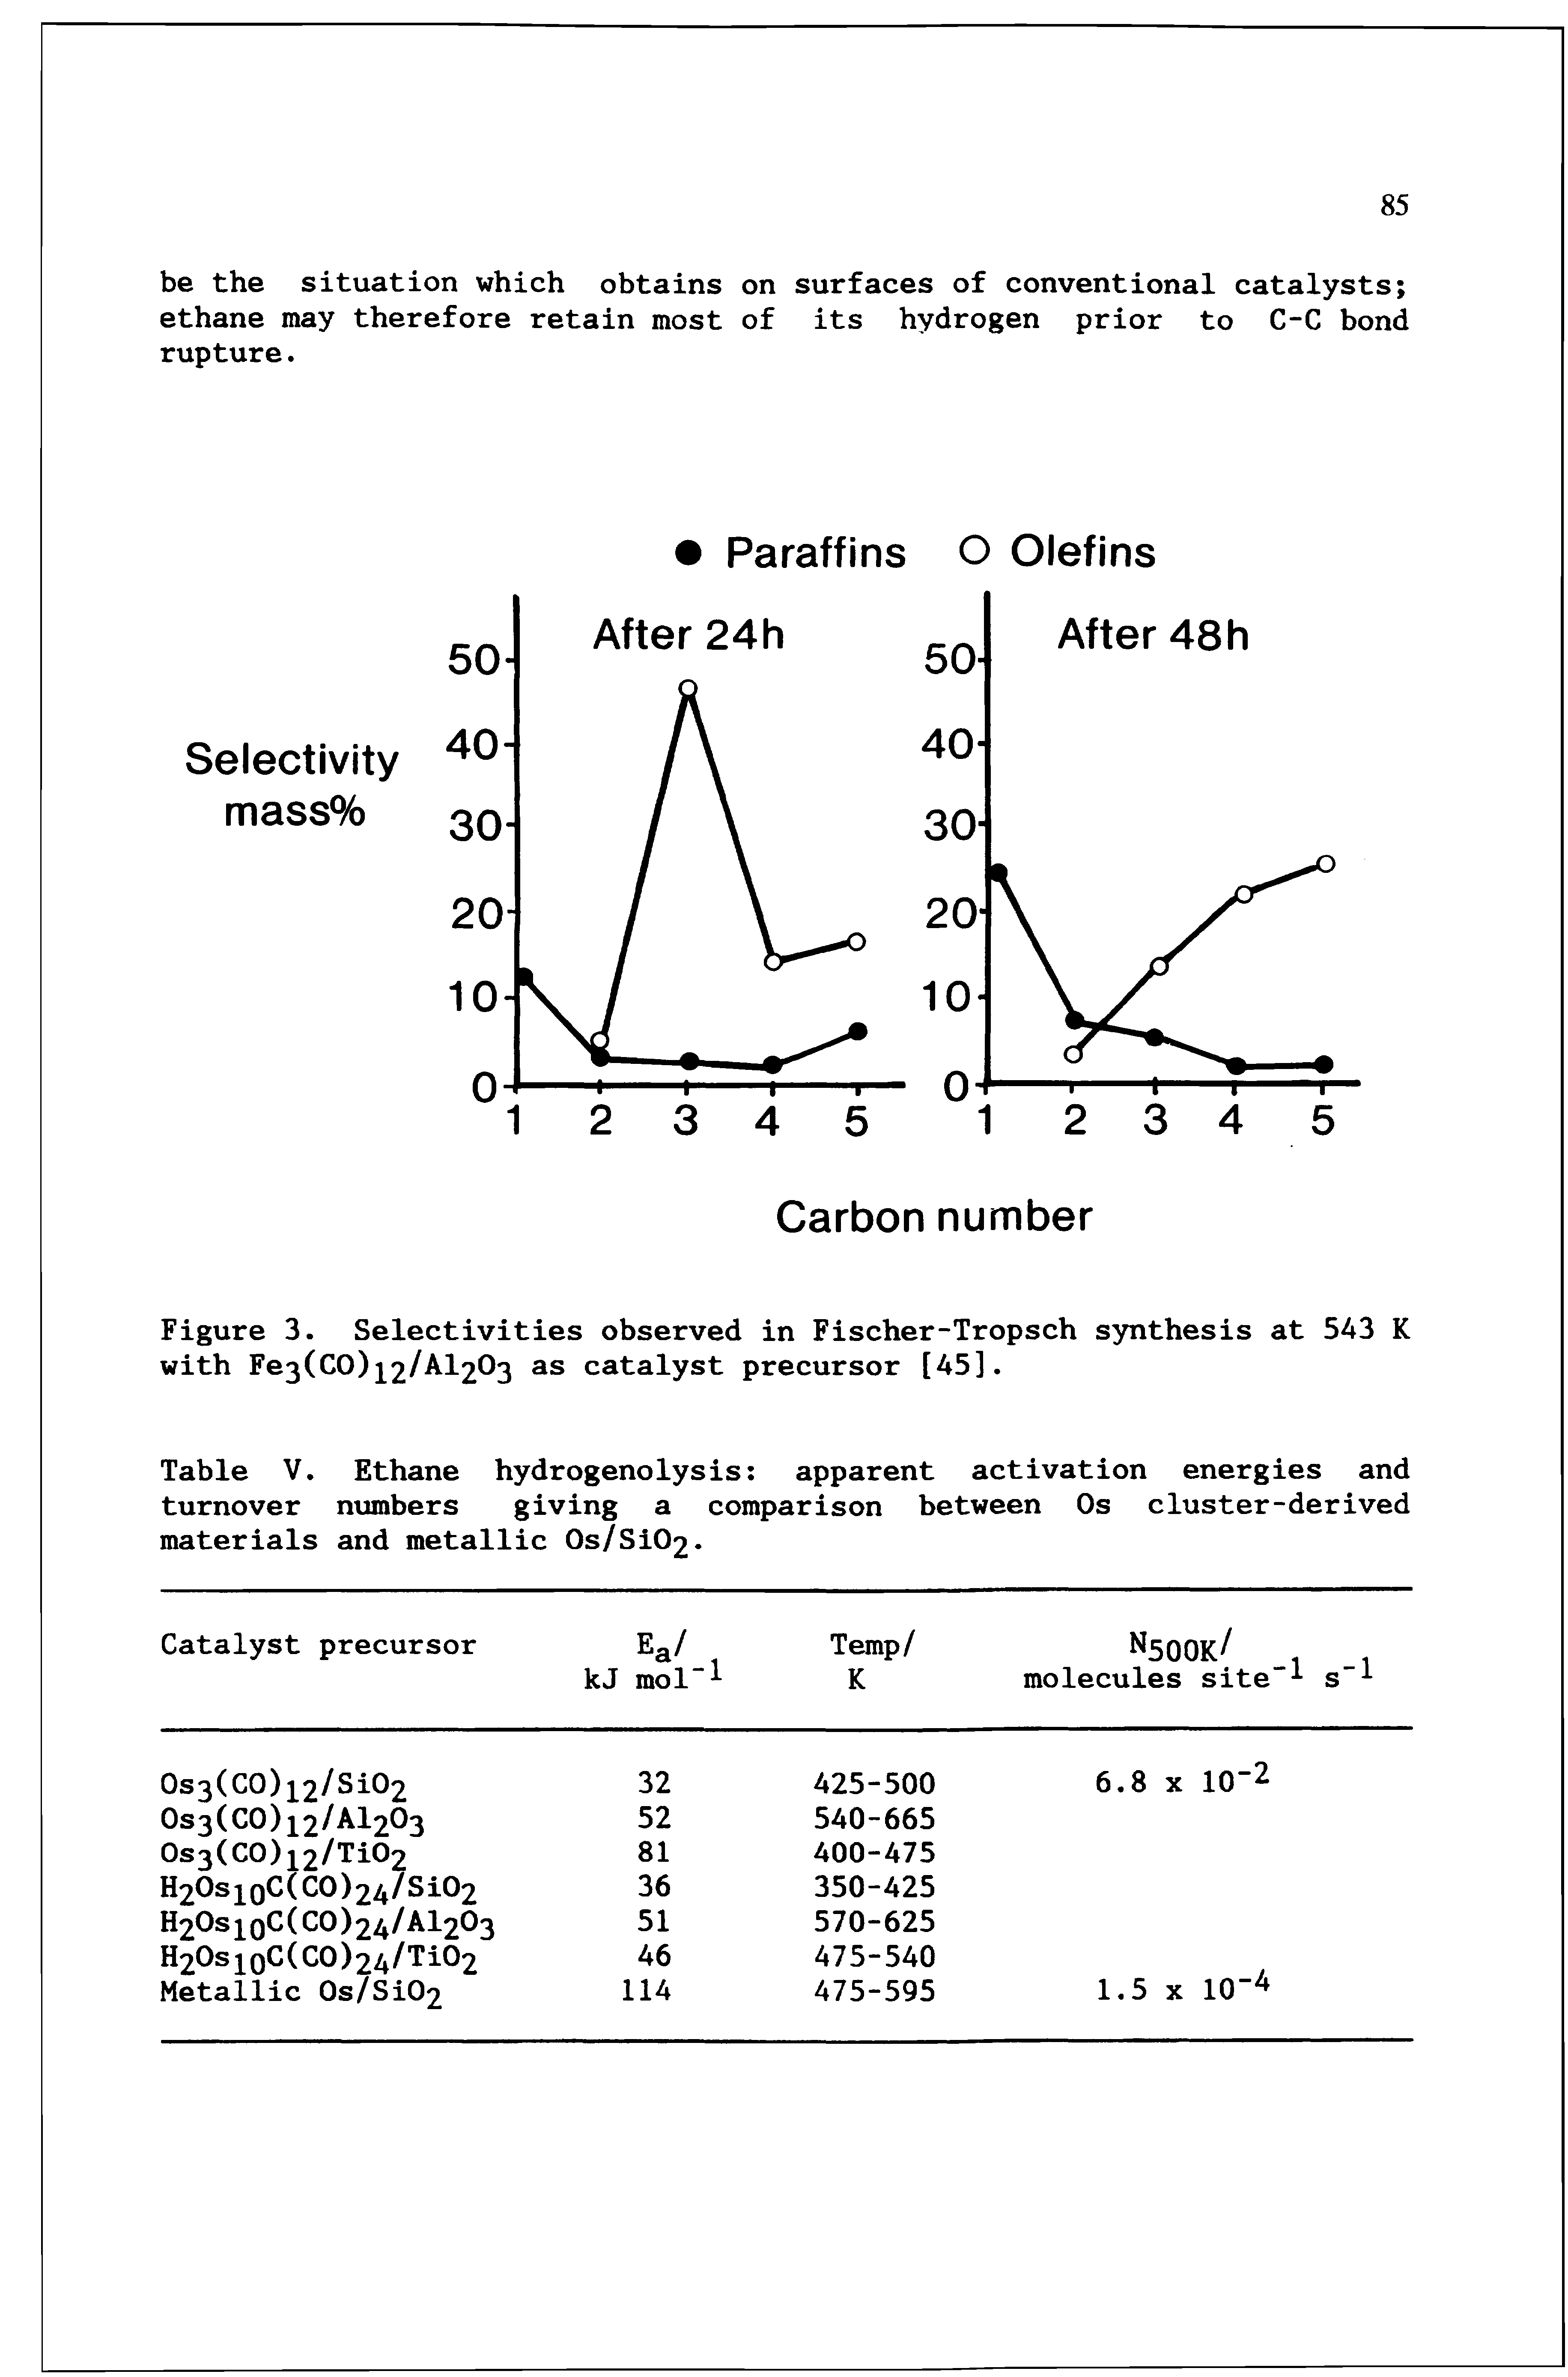 Table V. Ethane hydrogenolysis apparent activation energies and turnover numbers giving a comparison between Os cluster-derived materials and metallic 0s/Si02.